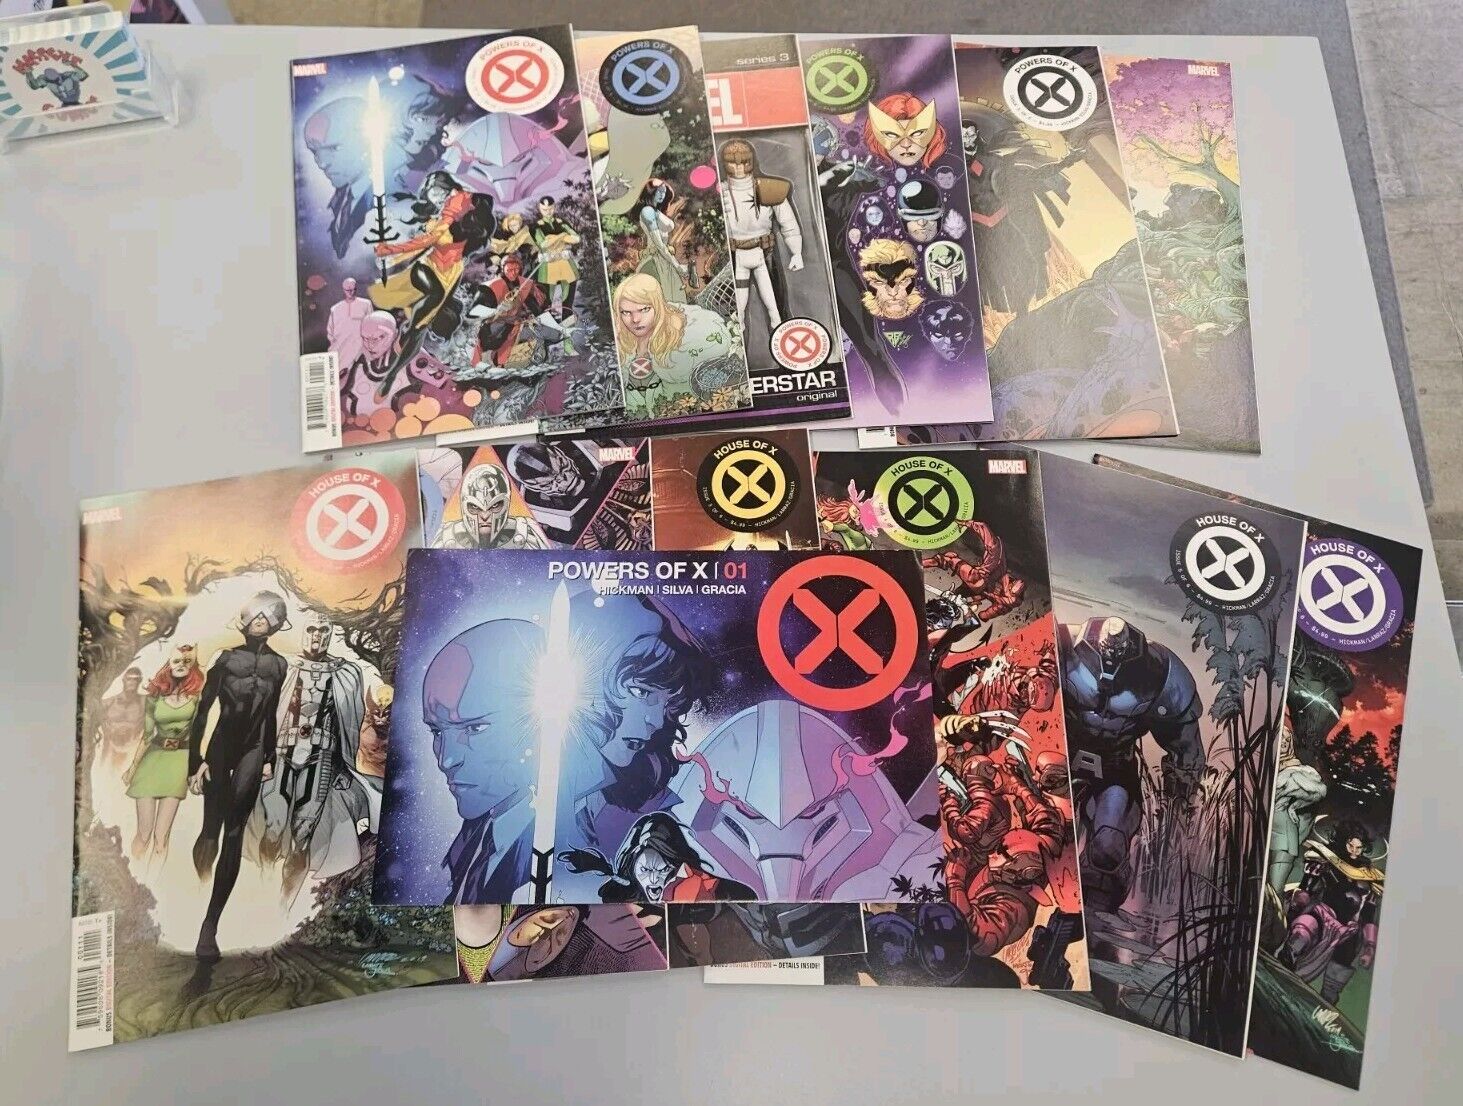 LOT OF 12 HOUSE OF X #1-6 / POWERS OF X #1-6 COMPLETE SETS + Poster - X-MEN 2019